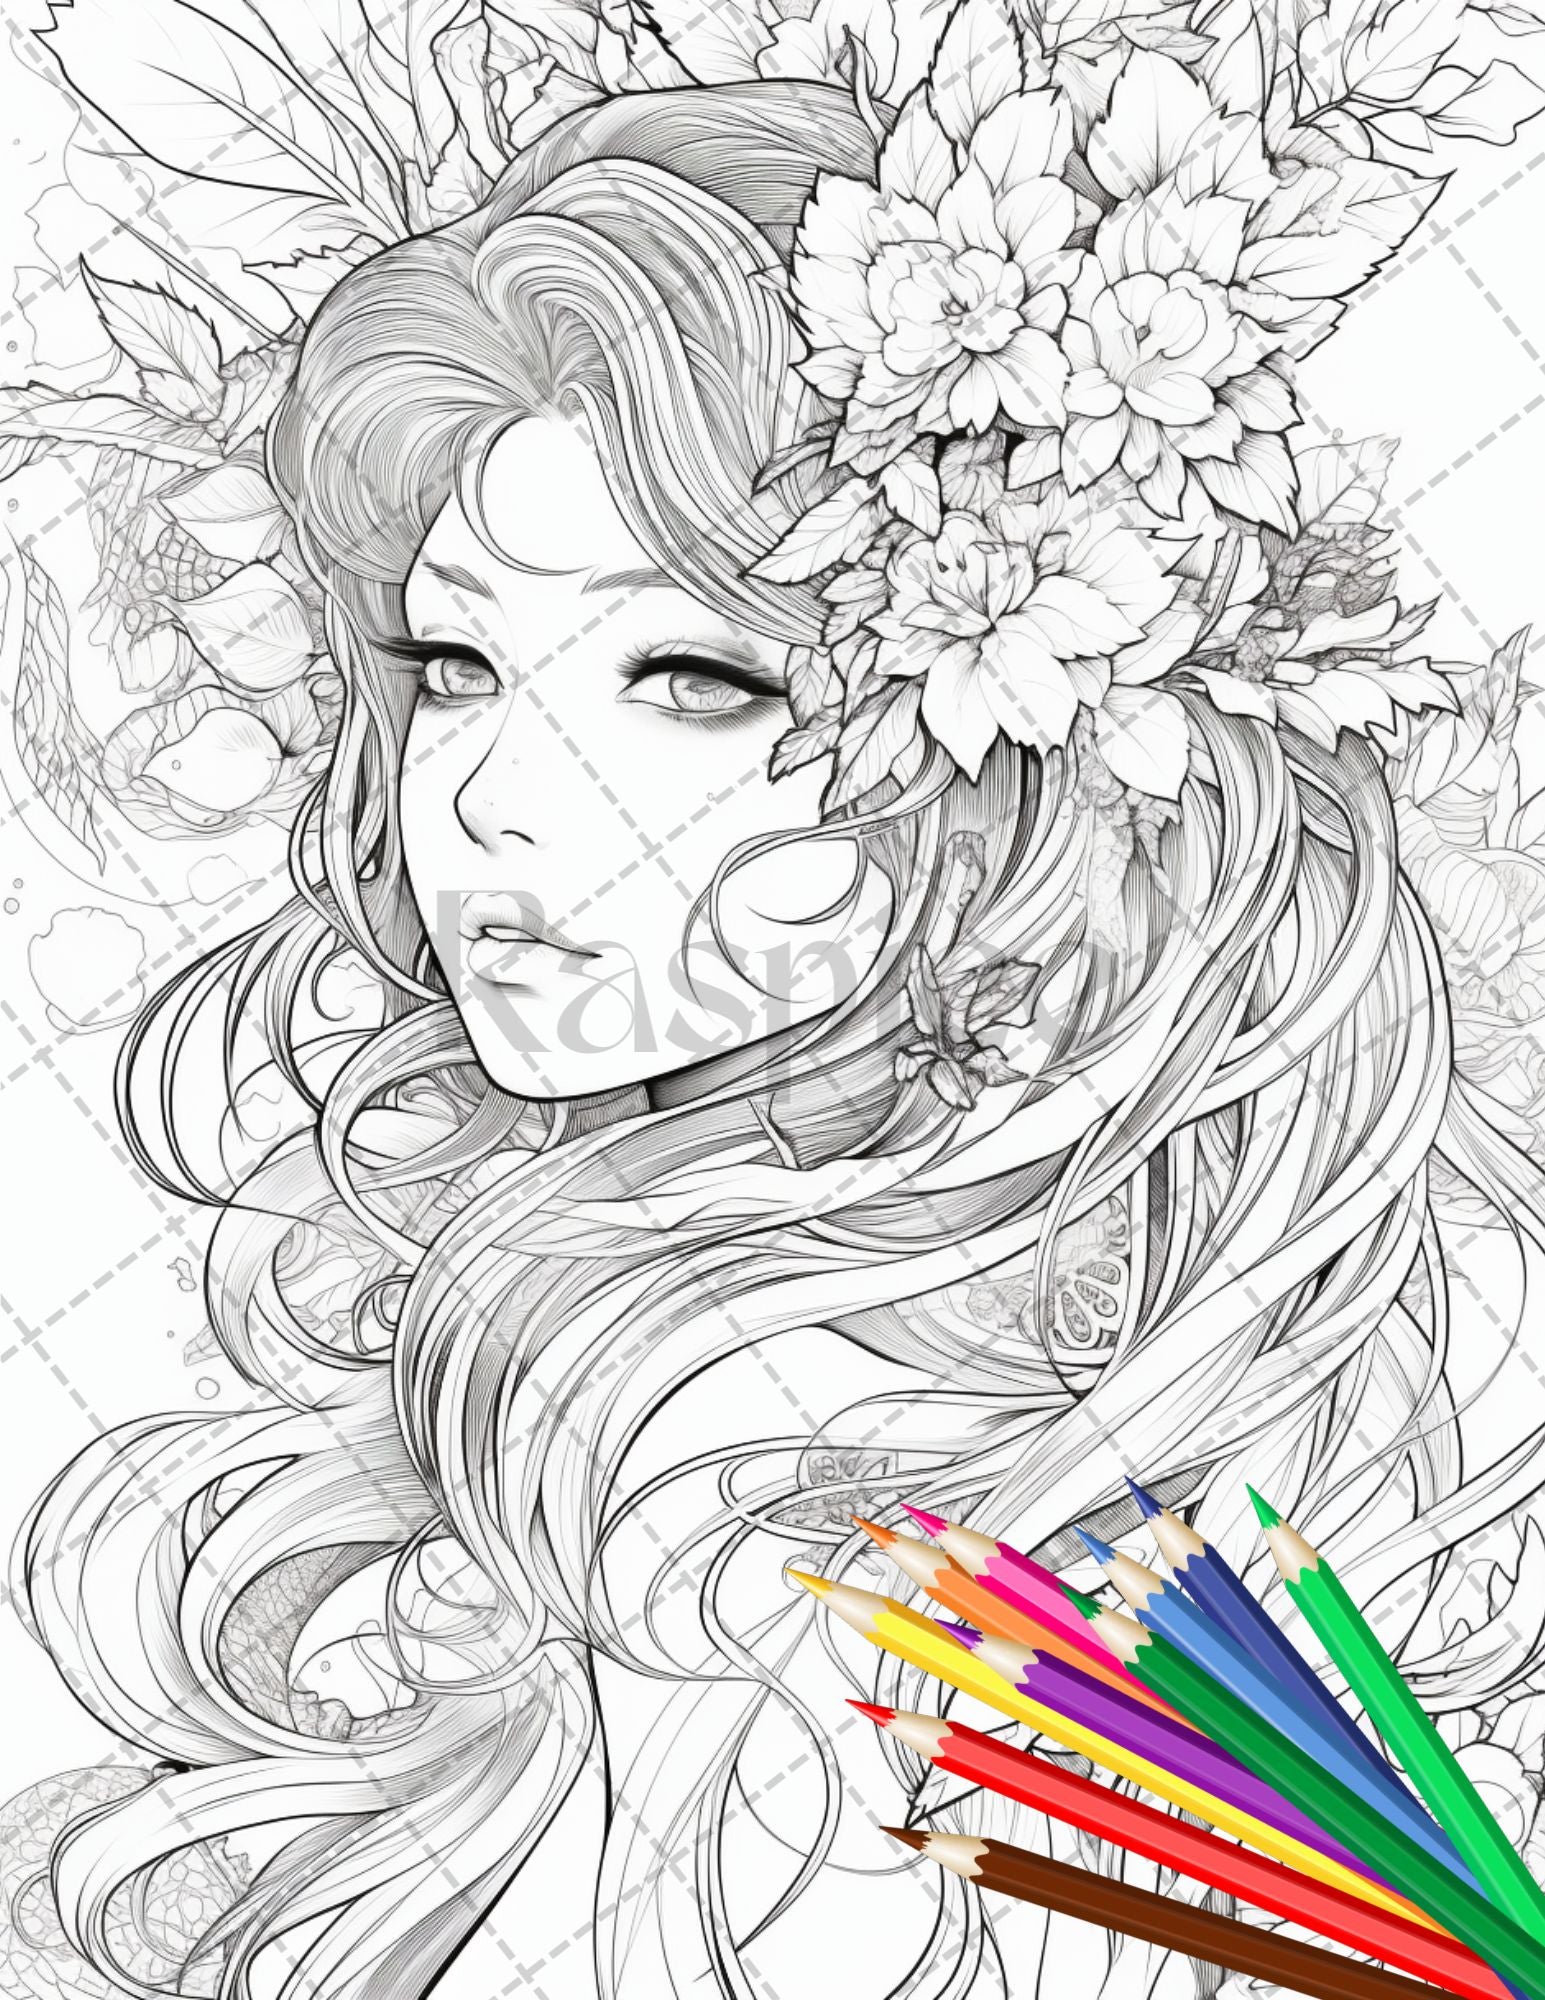 Anime fairy girl printable coloring pages for adults cute fairy gr â coloring